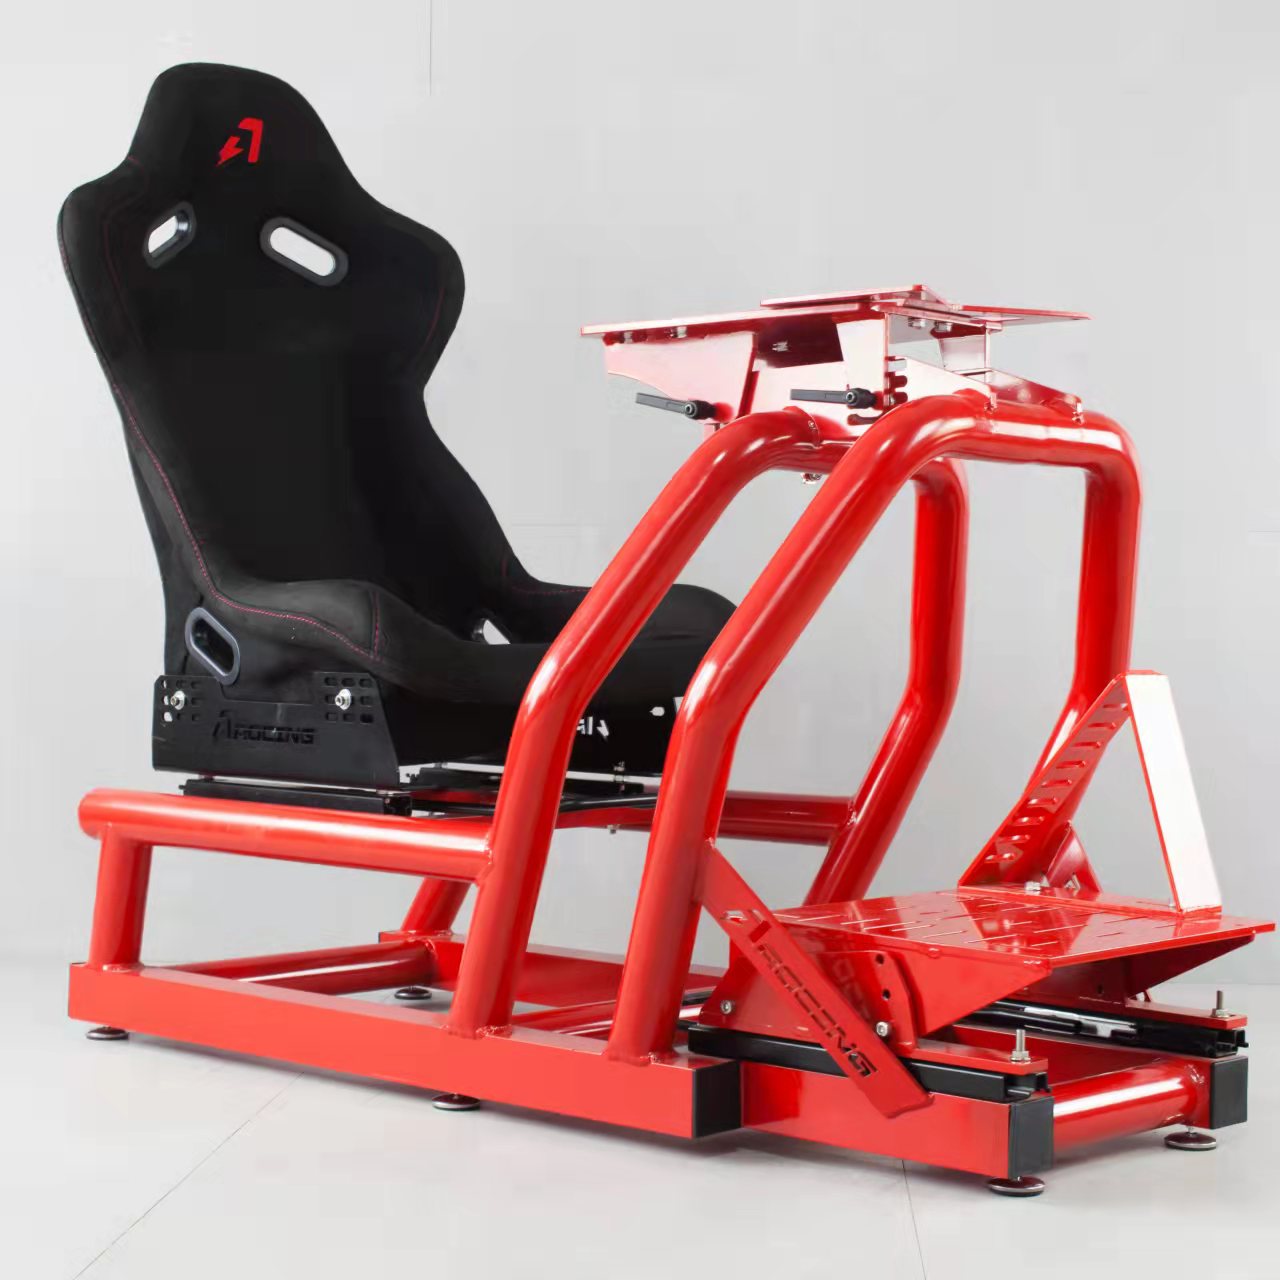 [USD 50.78] Azracing Simulated Racing Steering Wheel Stand Seat SV ...